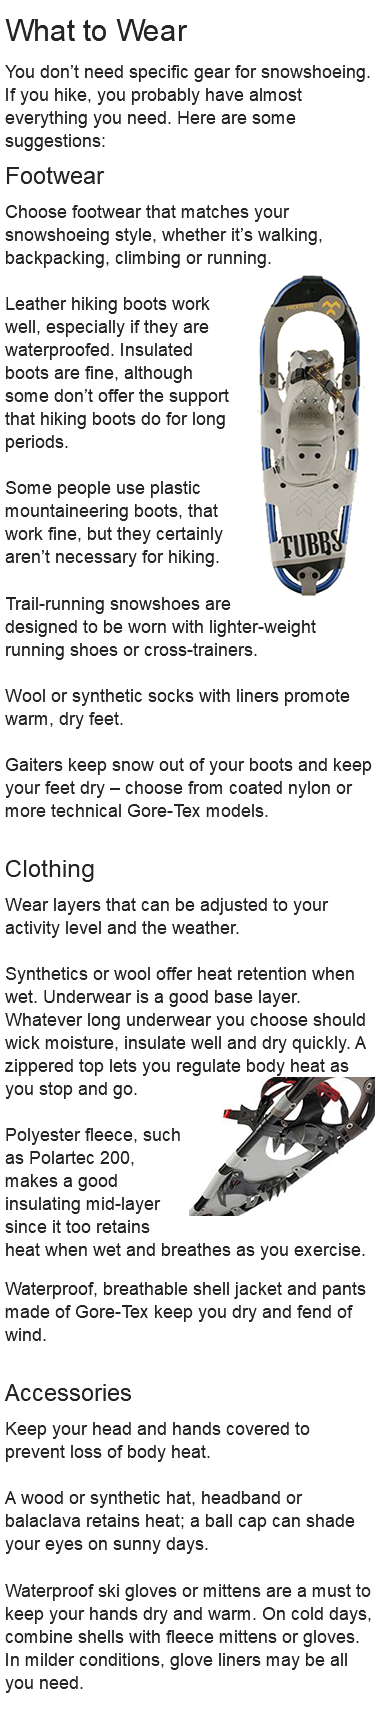 What to Wear You don’t need specific gear for snowshoeing. If you hike, you probably have almost everything you need. Here are some suggestions: Footwear Choose footwear that matches your snowshoeing style, whether it’s walking, backpacking, climbing or running.﷯ Leather hiking boots work well, especially if they are waterproofed. Insulated boots are fine, although some don’t offer the support that hiking boots do for long periods. Some people use plastic mountaineering boots, that work fine, but they certainly aren’t necessary for hiking. Trail-running snowshoes are designed to be worn with lighter-weight running shoes or cross-trainers. Wool or synthetic socks with liners promote warm, dry feet. Gaiters keep snow out of your boots and keep your feet dry – choose from coated nylon or more technical Gore-Tex models. Clothing Wear layers that can be adjusted to your activity level and the weather. Synthetics or wool offer heat retention when wet. Underwear is a good base layer. Whatever long underwear you choose should wick moisture, insulate well and dry quickly. A zippered top lets you regulate body heat as you stop and go.﷯ Polyester fleece, such as Polartec 200, makes a good insulating mid-layer since it too retains heat when wet and breathes as you exercise. Waterproof, breathable shell jacket and pants made of Gore-Tex keep you dry and fend of wind. Accessories Keep your head and hands covered to prevent loss of body heat. A wood or synthetic hat, headband or balaclava retains heat; a ball cap can shade your eyes on sunny days. Waterproof ski gloves or mittens are a must to keep your hands dry and warm. On cold days, combine shells with fleece mittens or gloves. In milder conditions, glove liners may be all you need. 